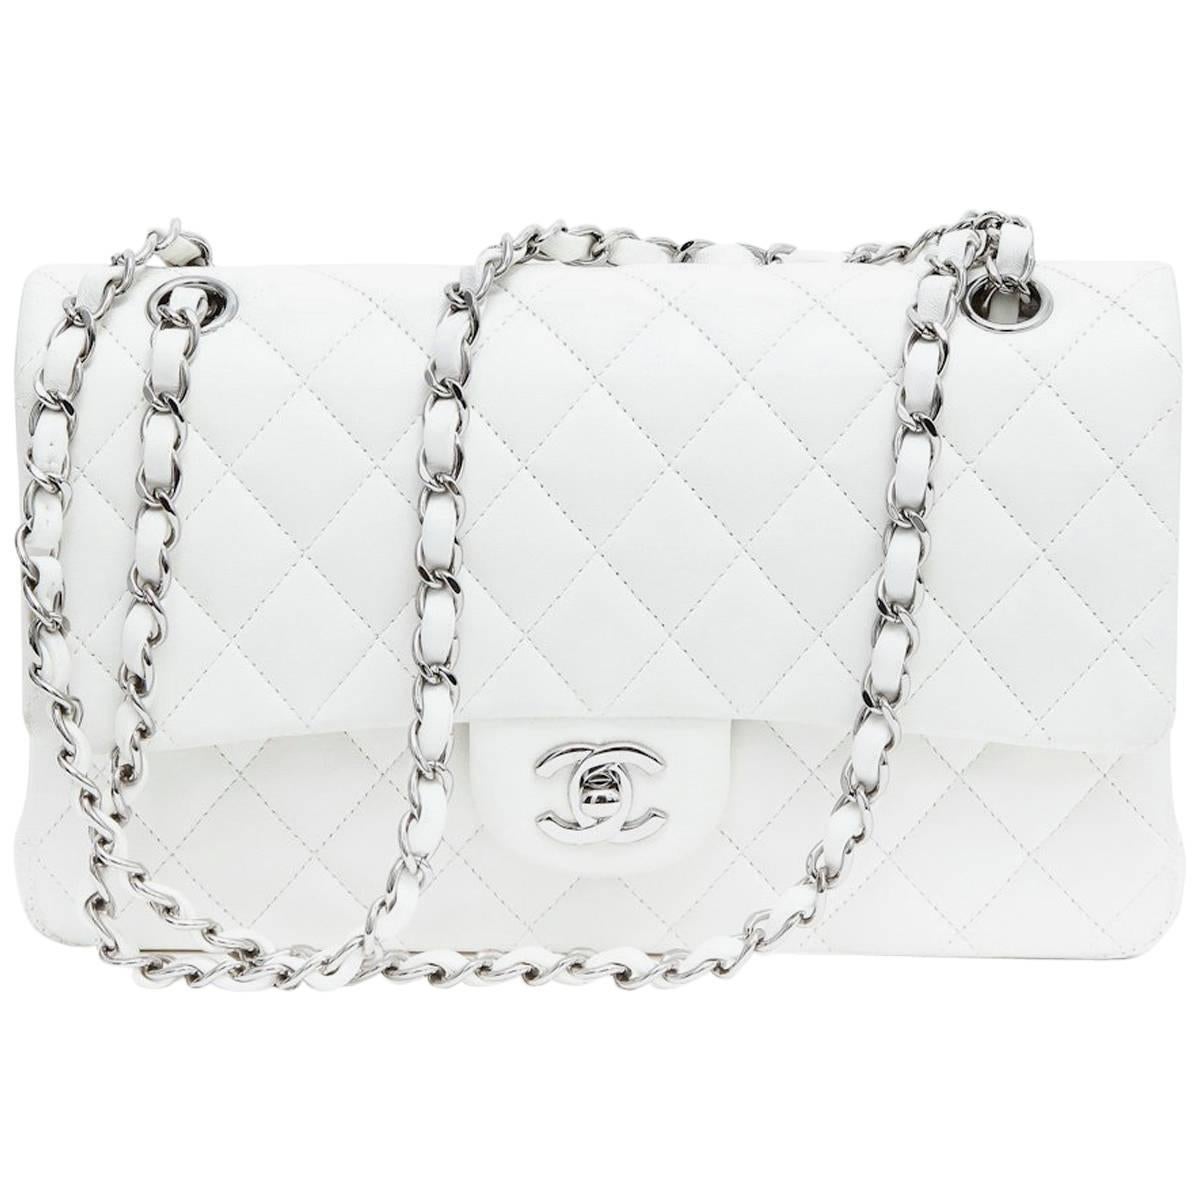 CHANEL 'Timeless' Double Flap Bag in Quilted White Lamb Leather